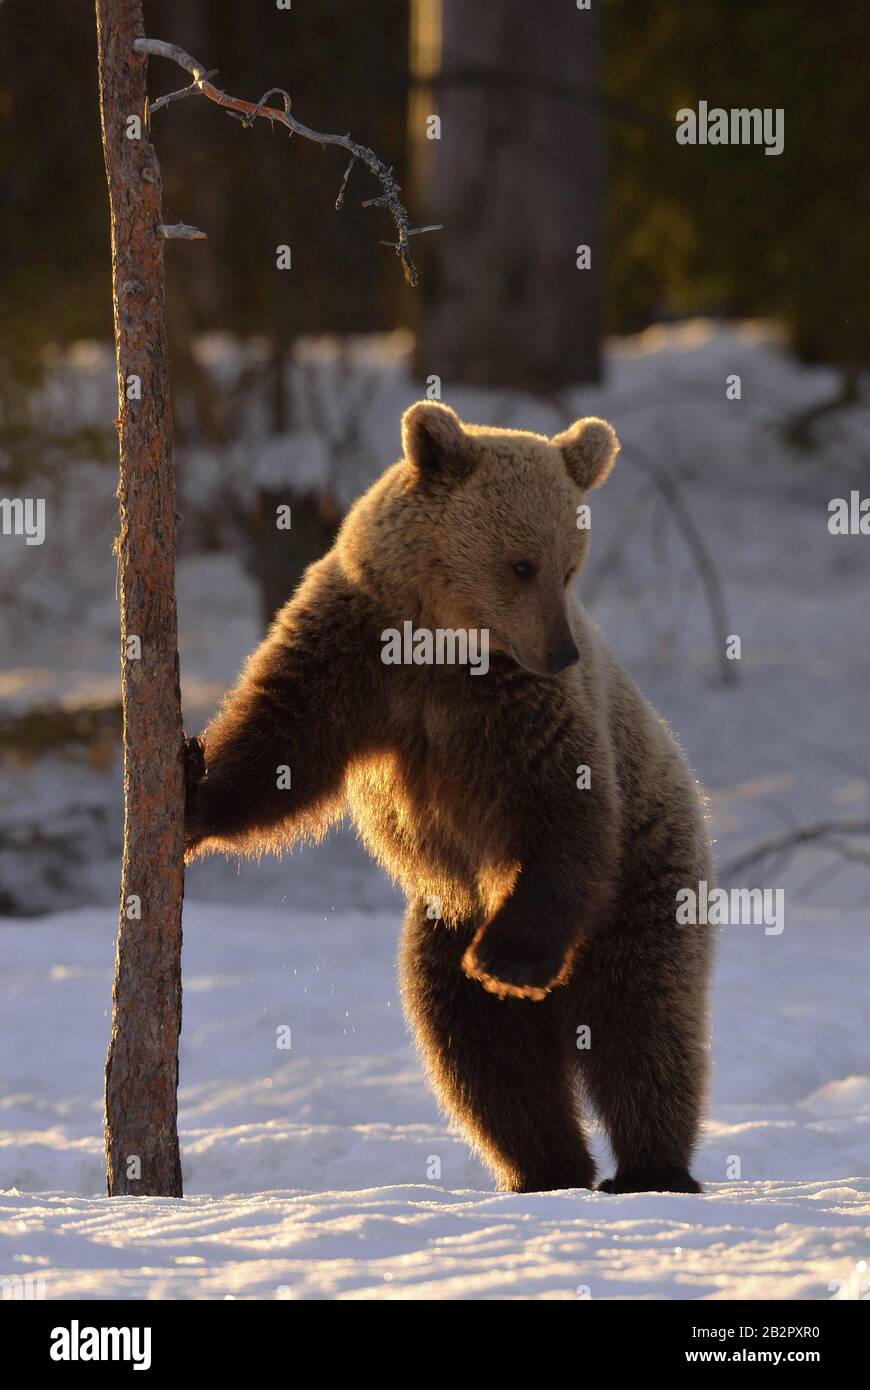 Brown bear stands on its hind legs by a pine tree in winter forest at sunset light. Scientific name: Ursus arctos. Natural habitat. Winter season. Stock Photo